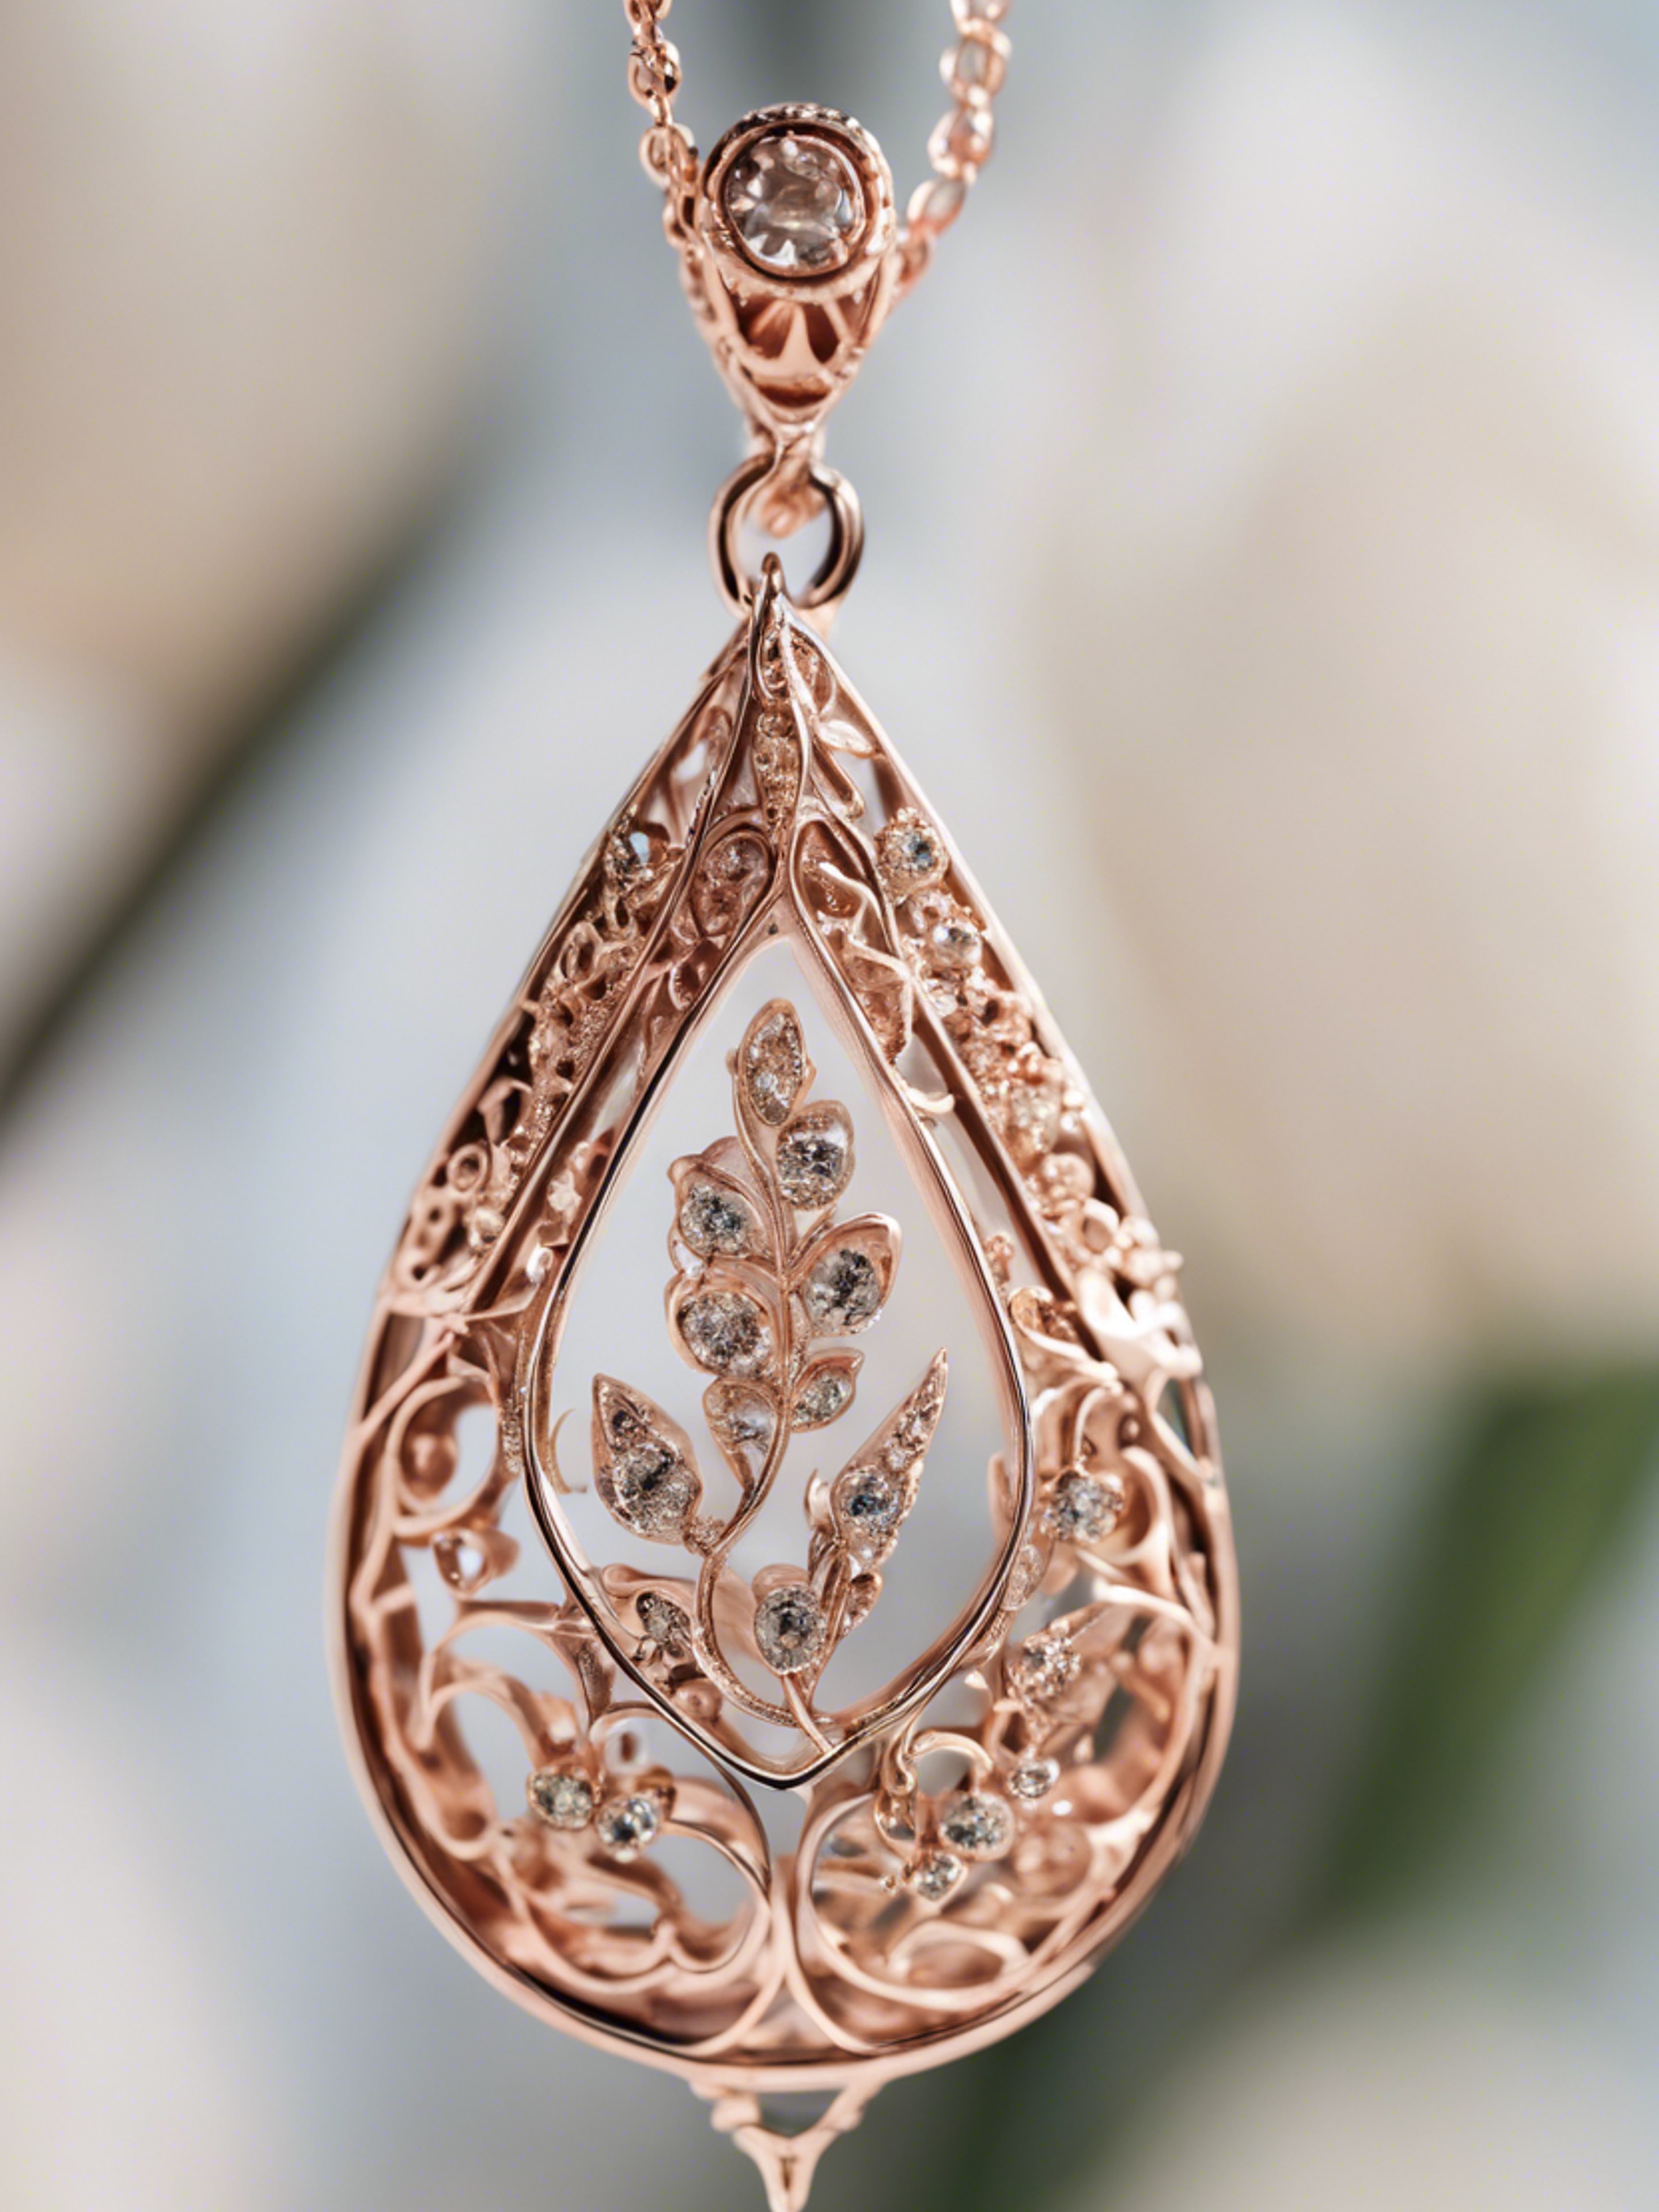 A close-up of a rose gold teardrop-shaped pendant with an intricate, floral design.壁紙[94a65aa8484349f1bf09]